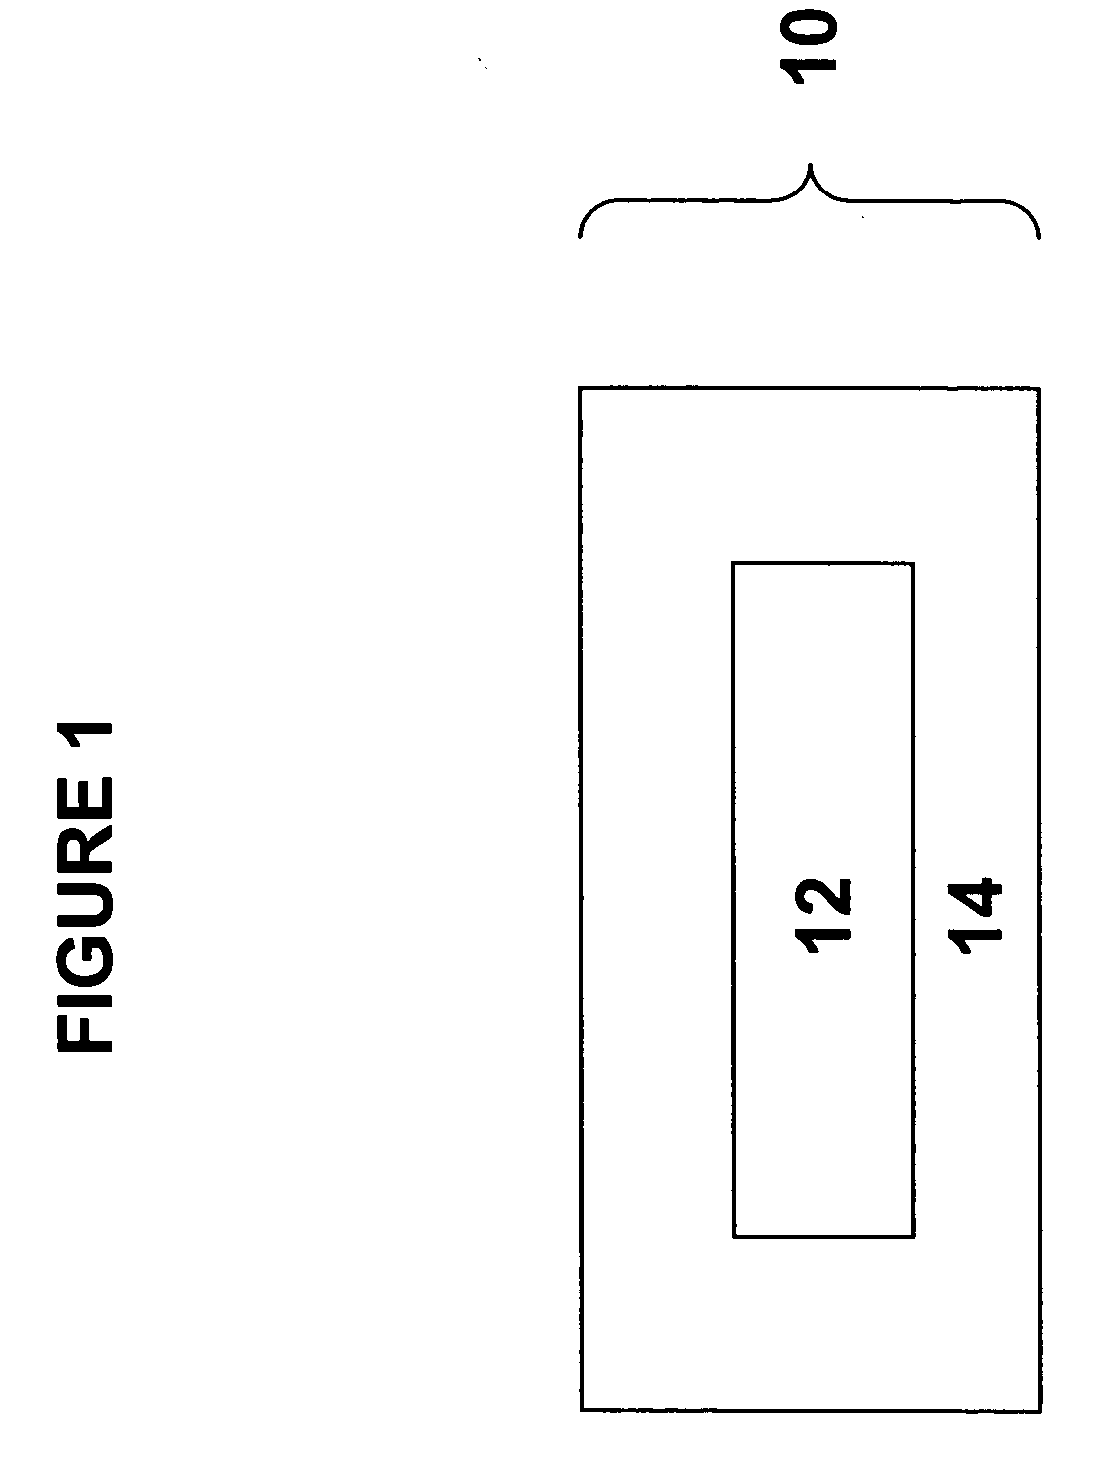 Powder coating precursors and the use thereof in powder coating compositions